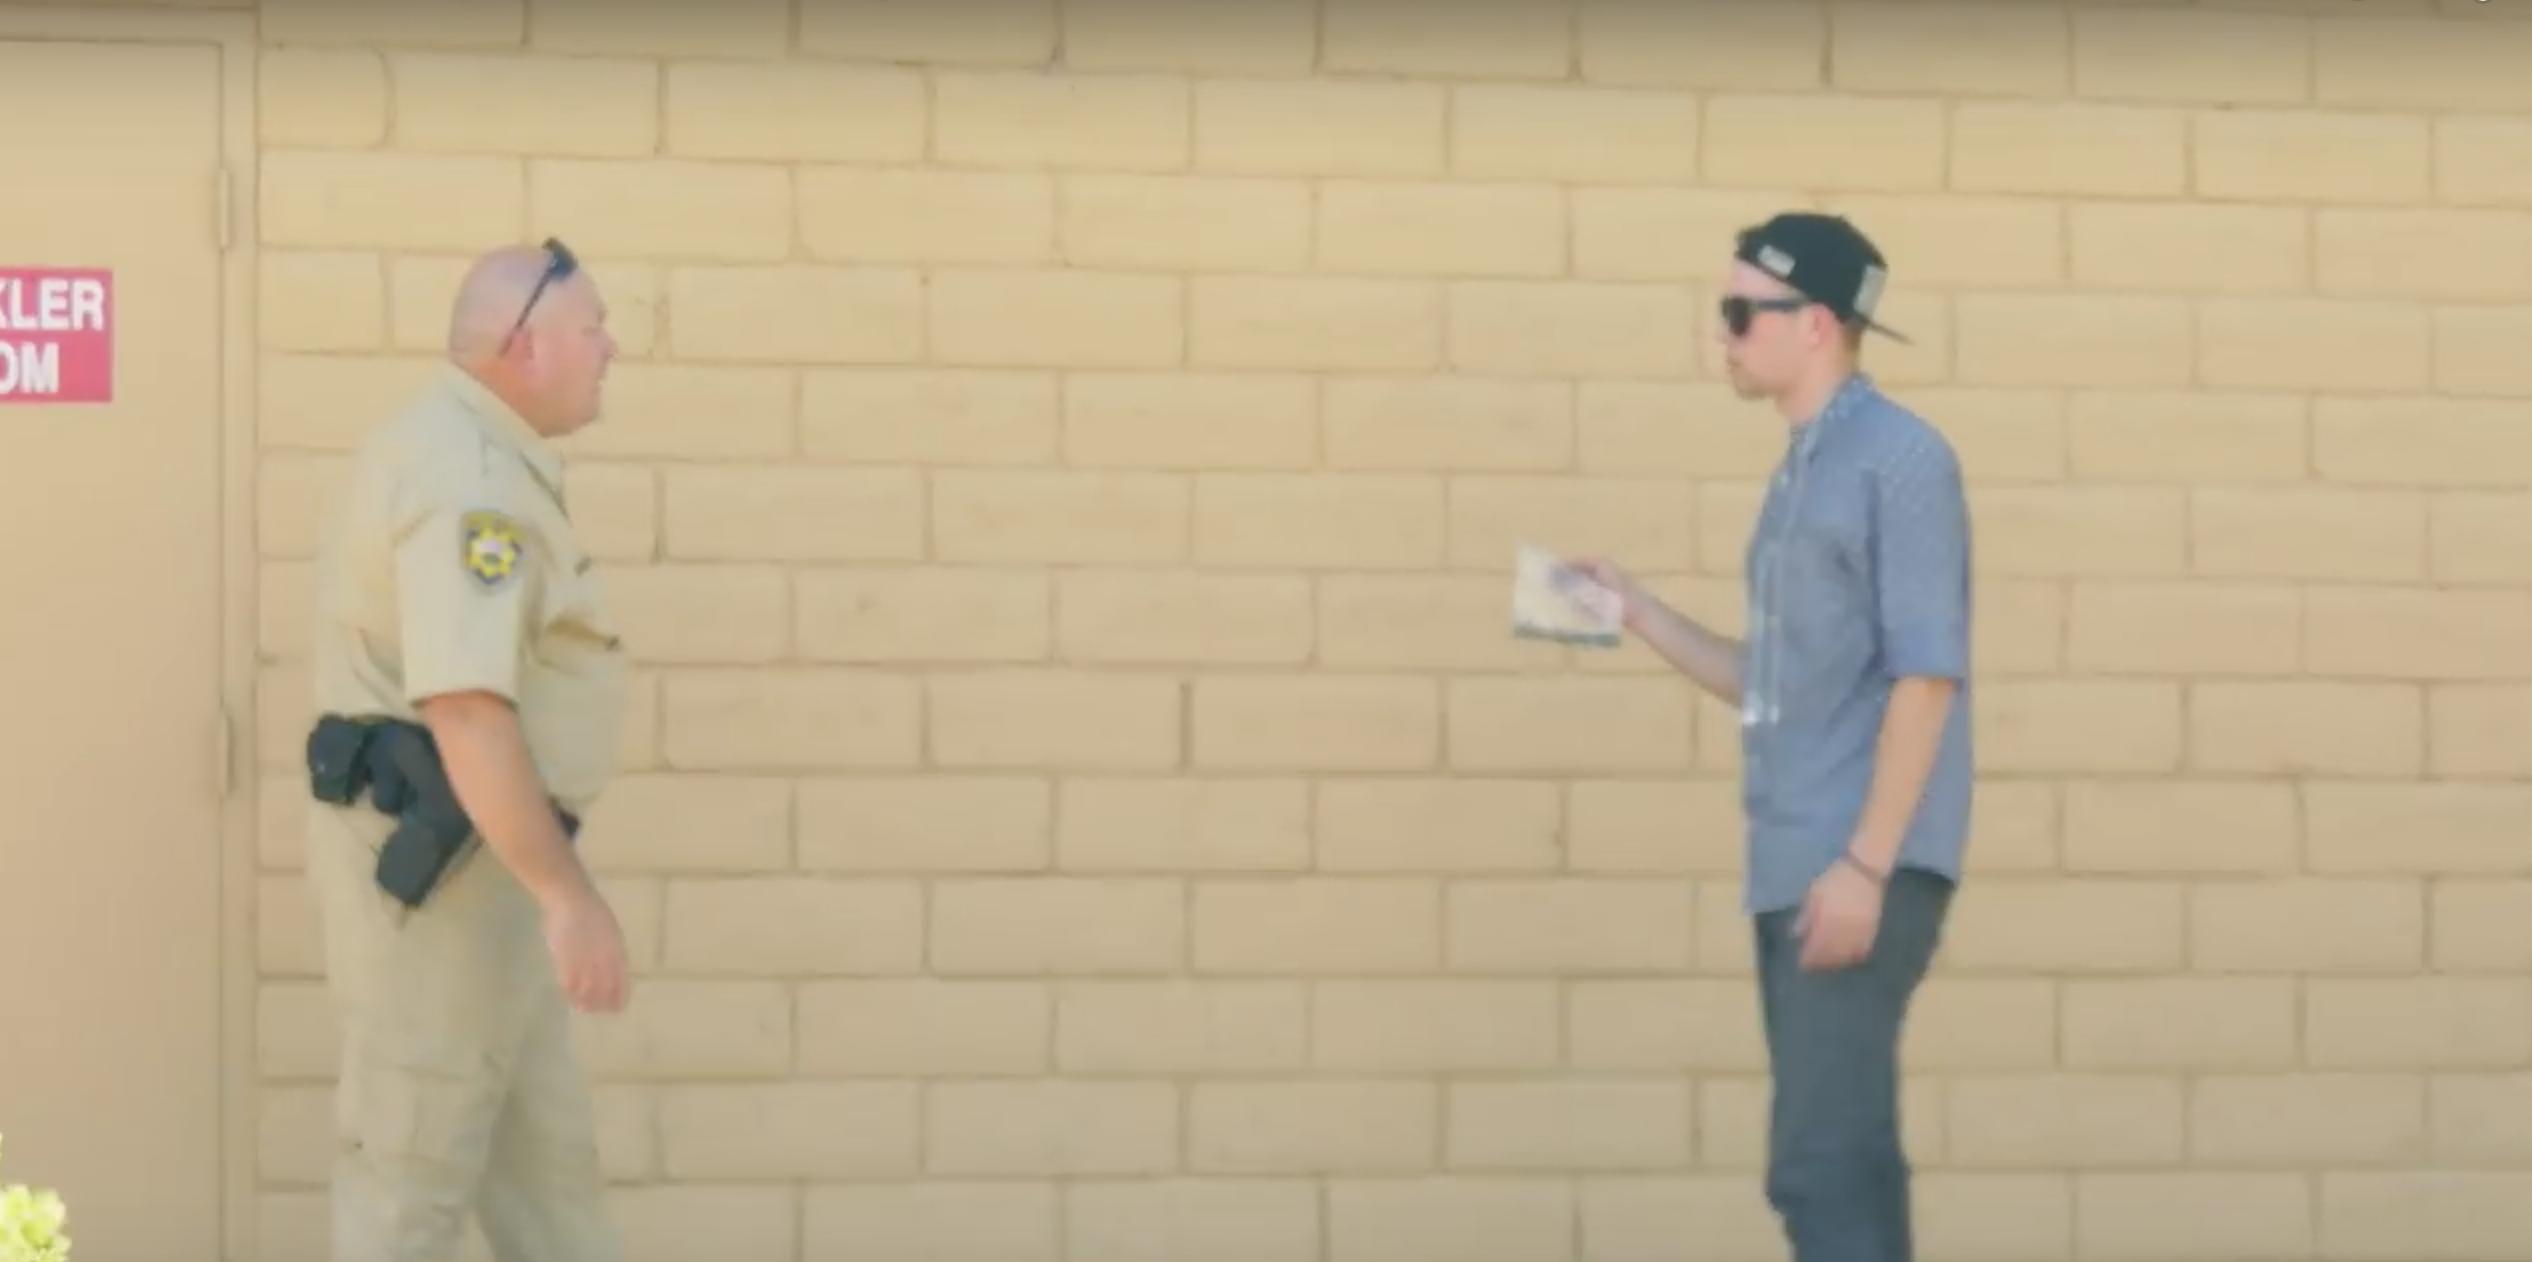 Watch: Magician Tries To Sell Weed To A Cop